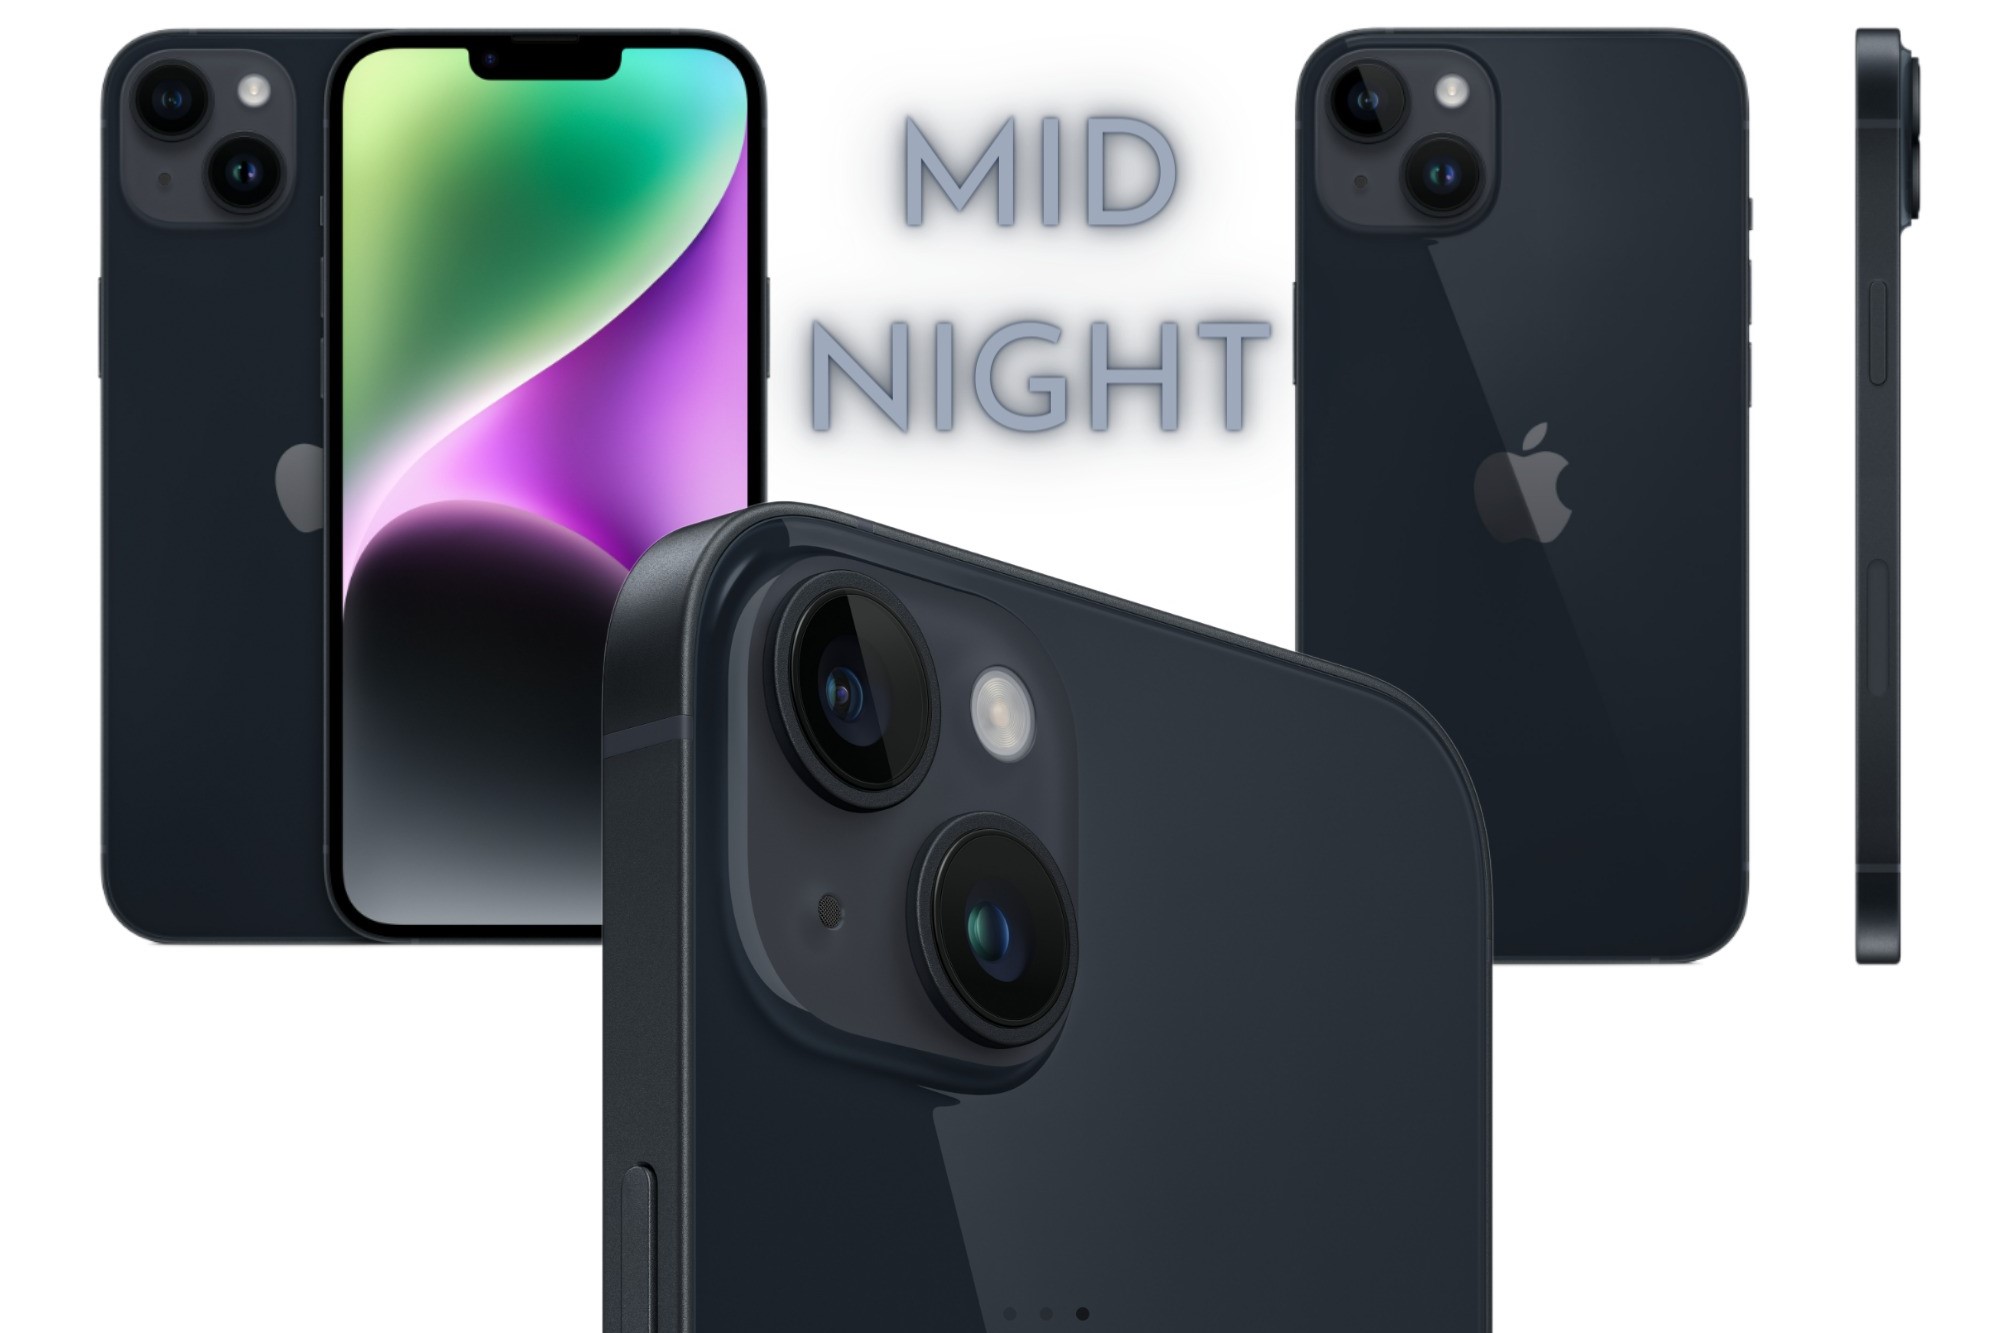 Midnight Color: Identifying The Midnight Color Of IPhone 14